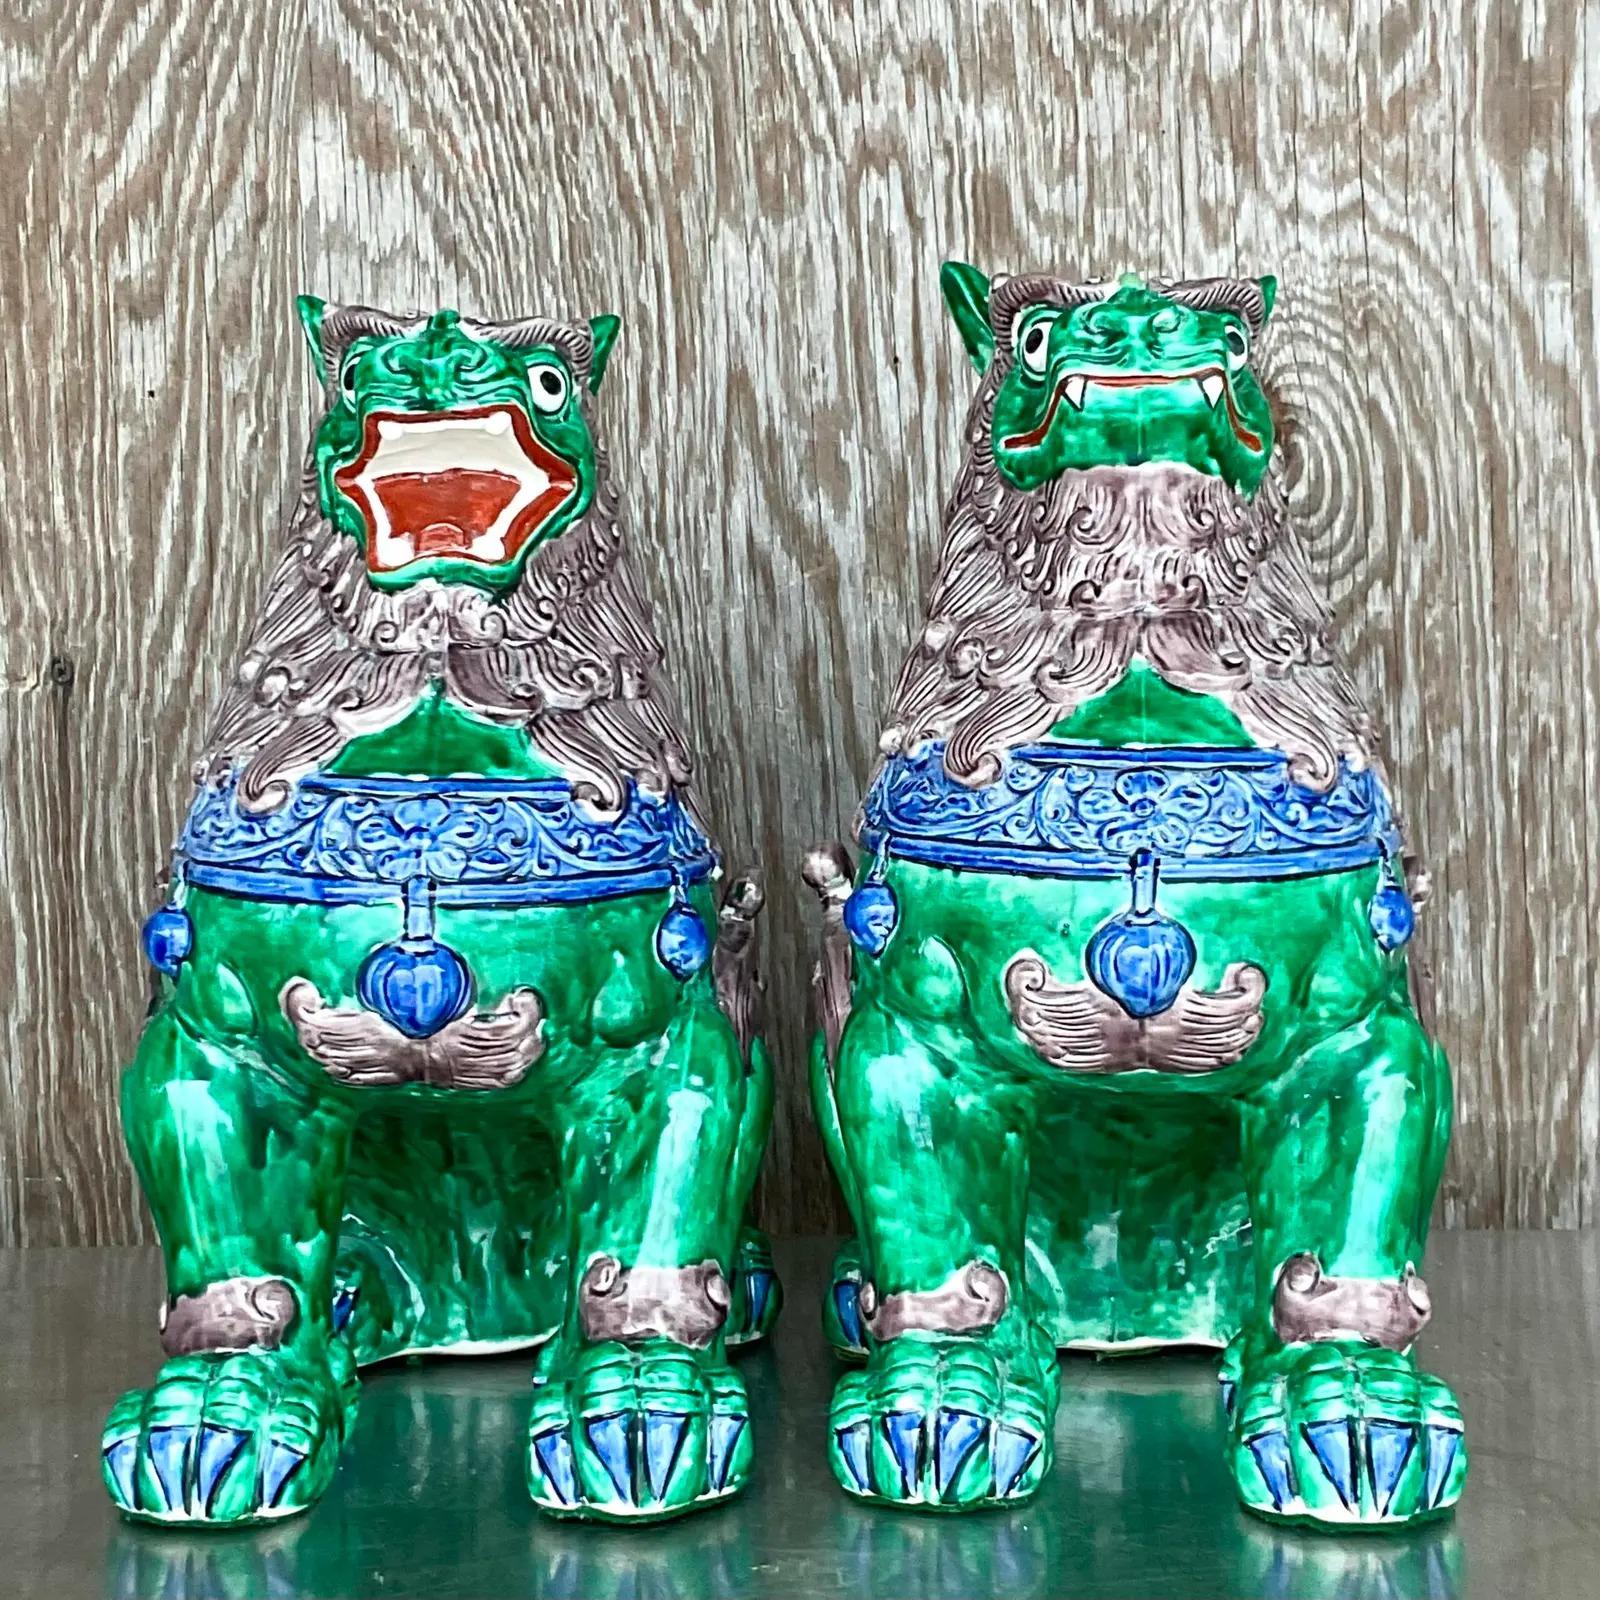 Vintage Asian Glazed Ceramic Foo Dogs - a Pair For Sale 3